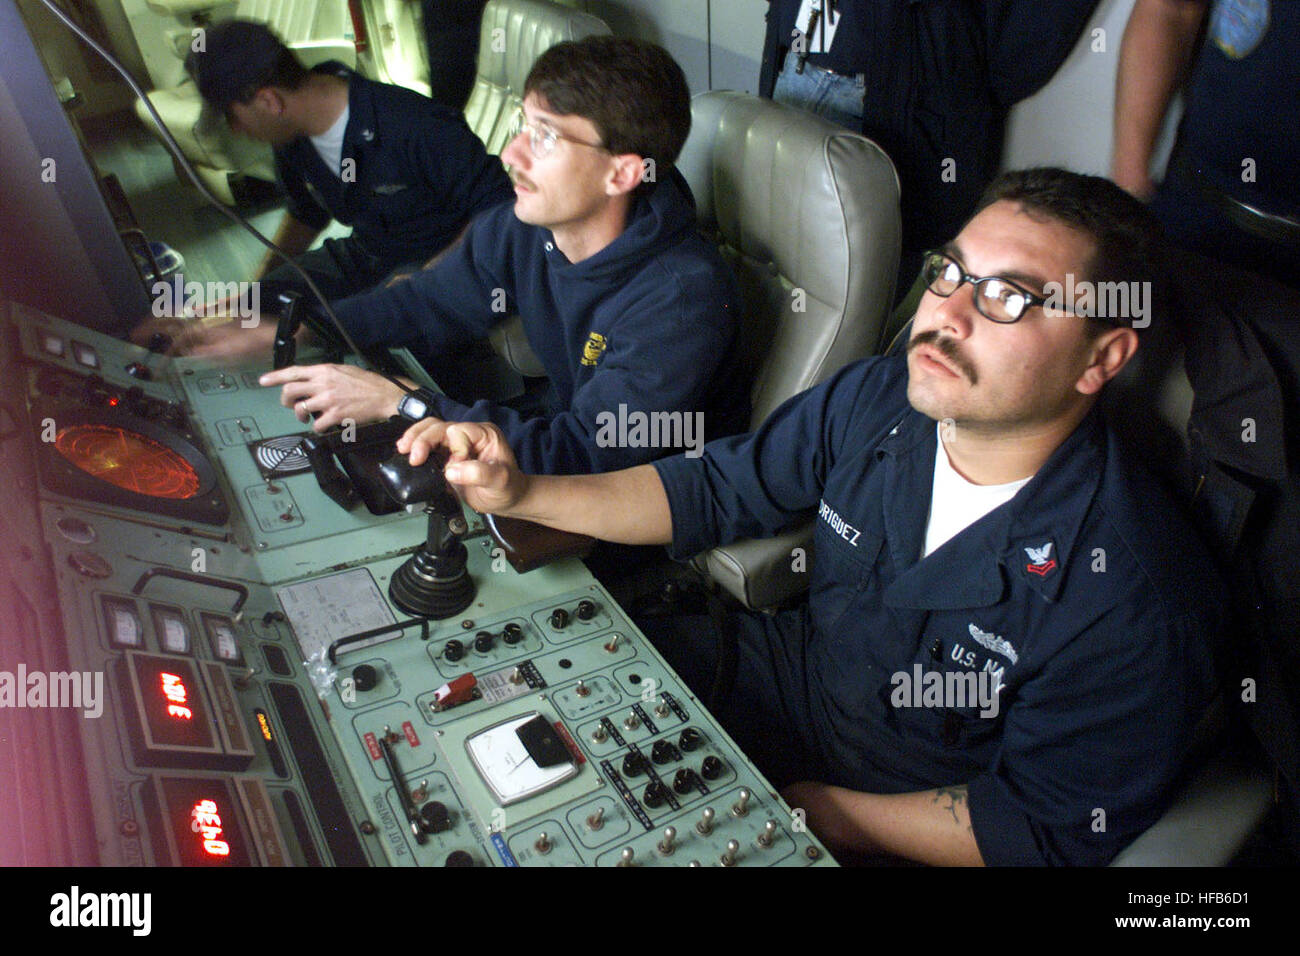 000203-N-5961C-002 Petty Officers 2nd Class Robert Rodriguez (right) and Robert Duncan (left) watch the video monitors as they search the ocean floor for the flight data recorder from the downed Alaska Airlines Flight 261 off the coast of Ventura County, Calif., on Feb. 3, 2000.  Rodriguez is piloting the SCORPIO, a  tethered unmanned work vehicle from the Navy's Deep Submergence Unit Unmanned Vehicle Detachment.  Duncan is the co-pilot and is responsible for the robotic hands of the SCORPIO.  The two Navy machinistÕs mates are controlling the submersible from the MV Kellie Chouest, a Military Stock Photo